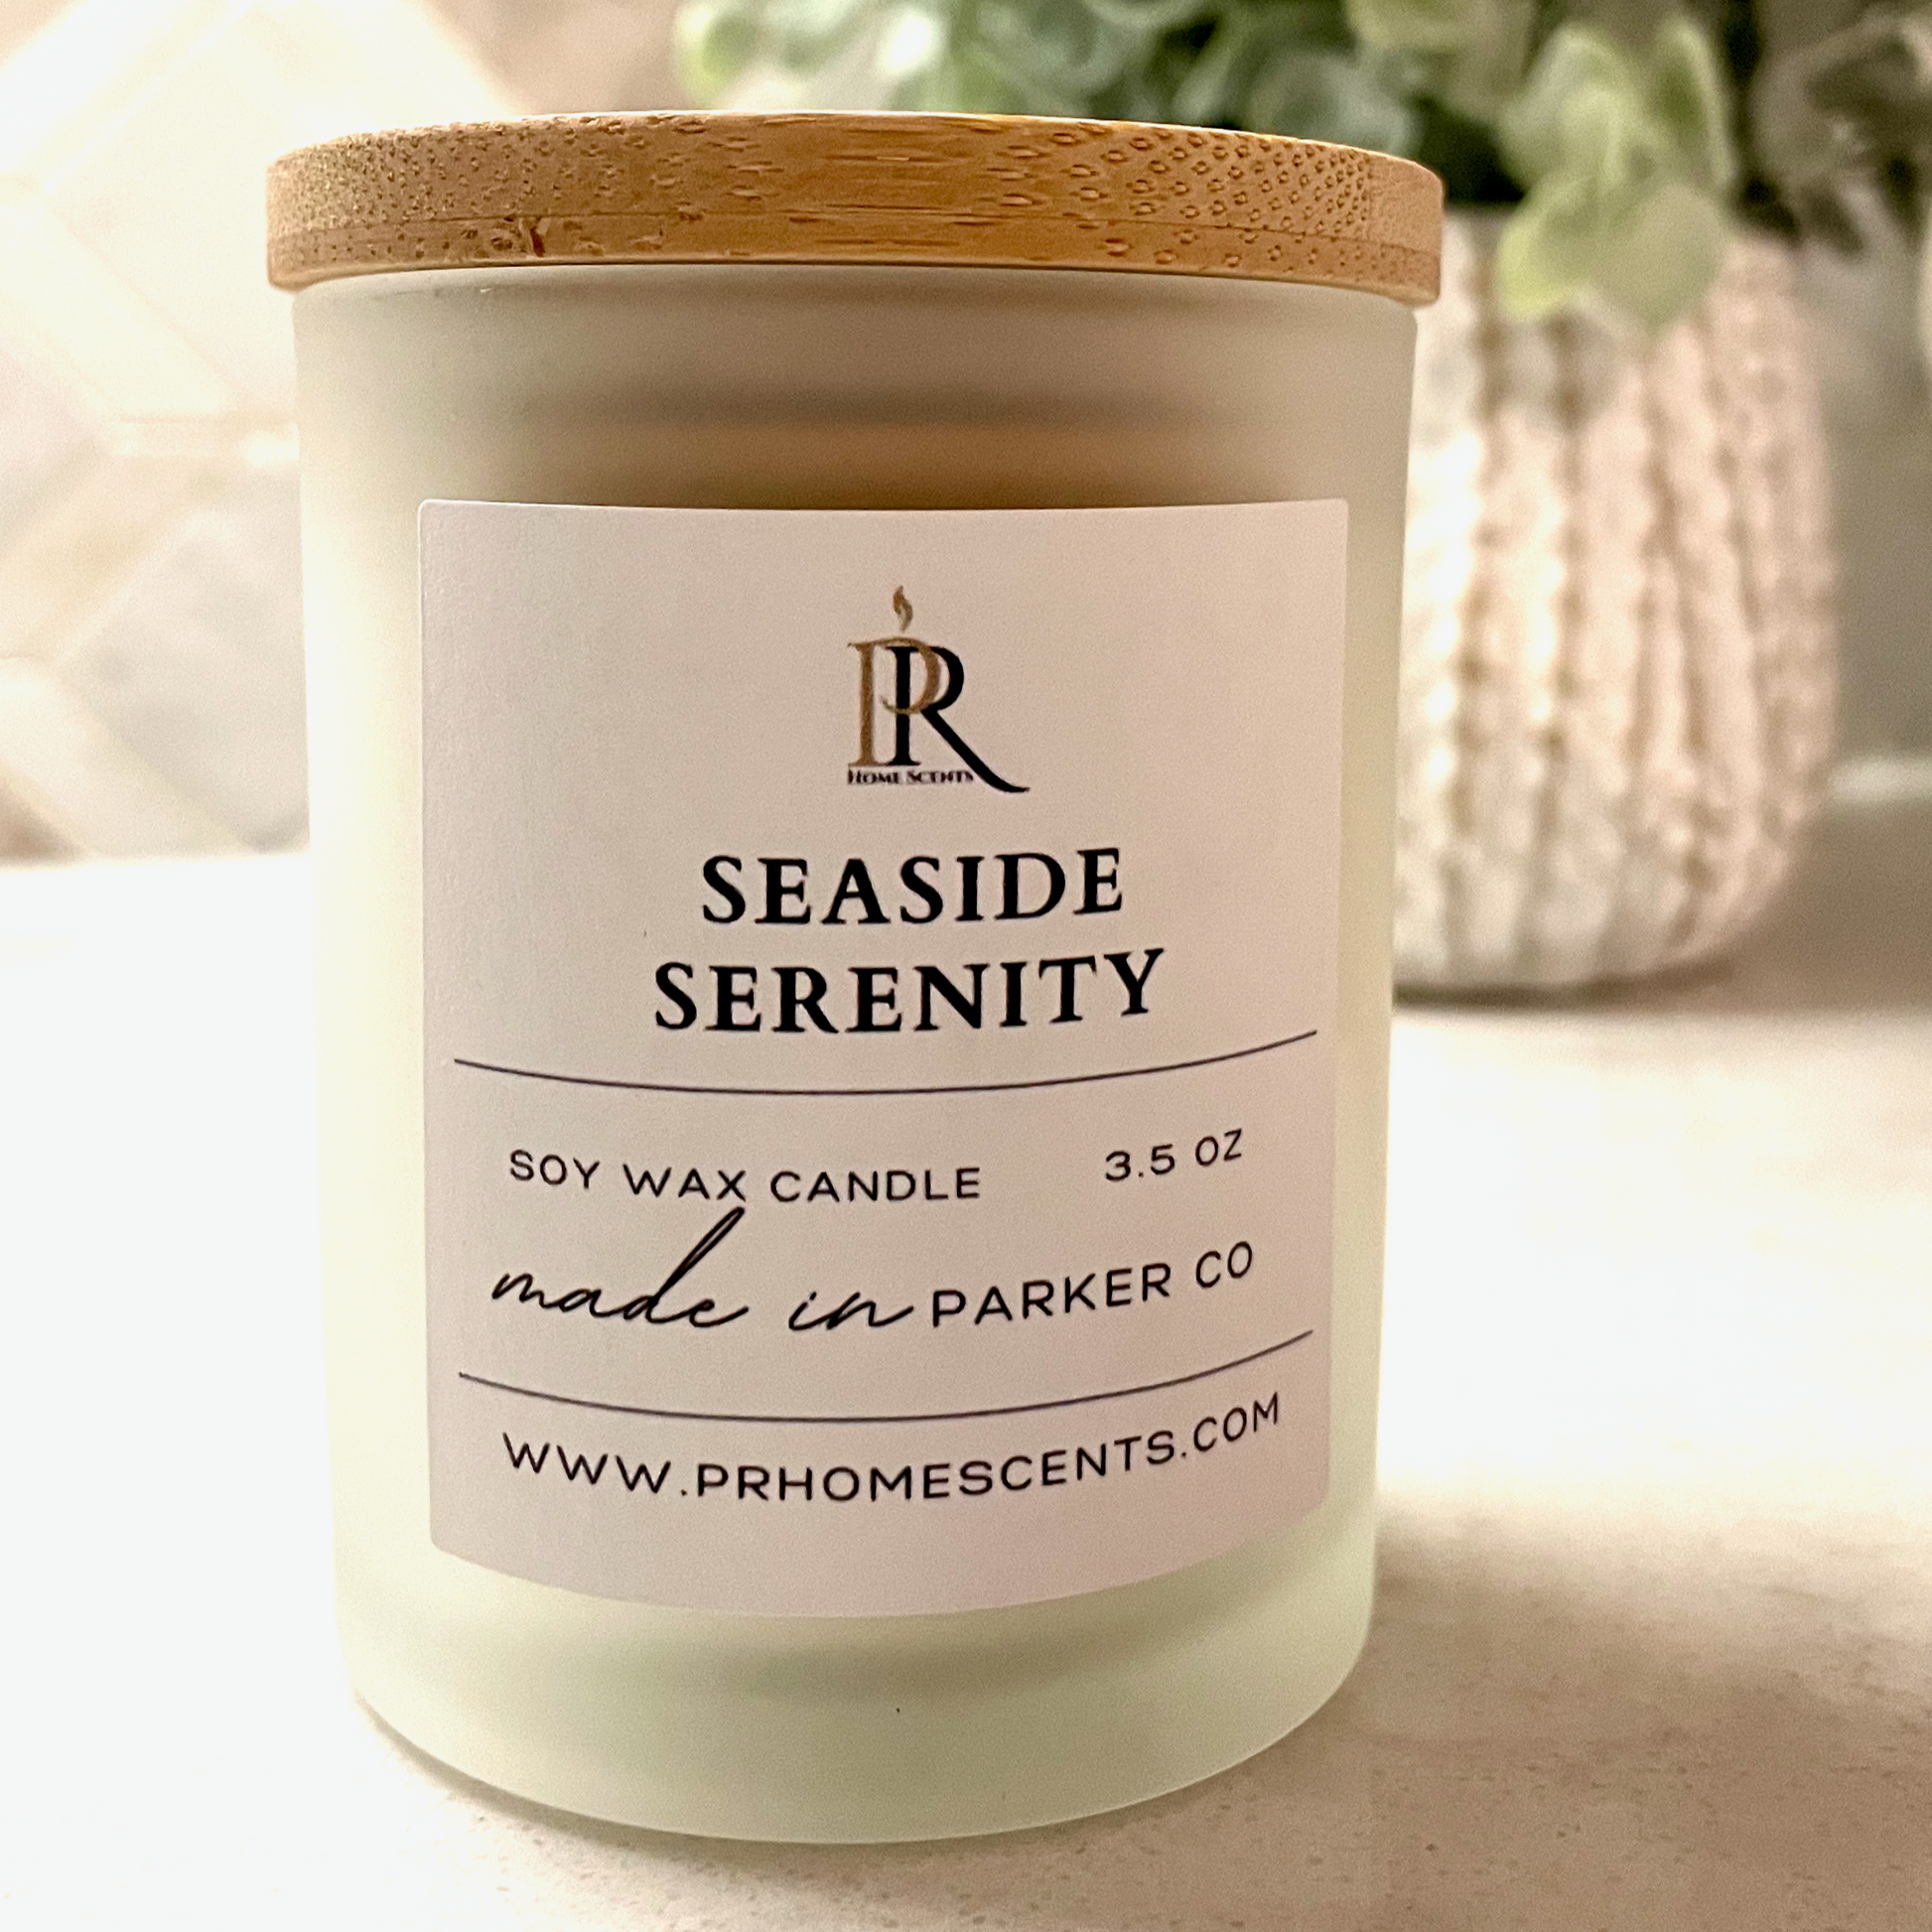 ocean smelling candles | yankee candle beach scent | fresh linen scent | seaside serenity | best spa scented candle ever